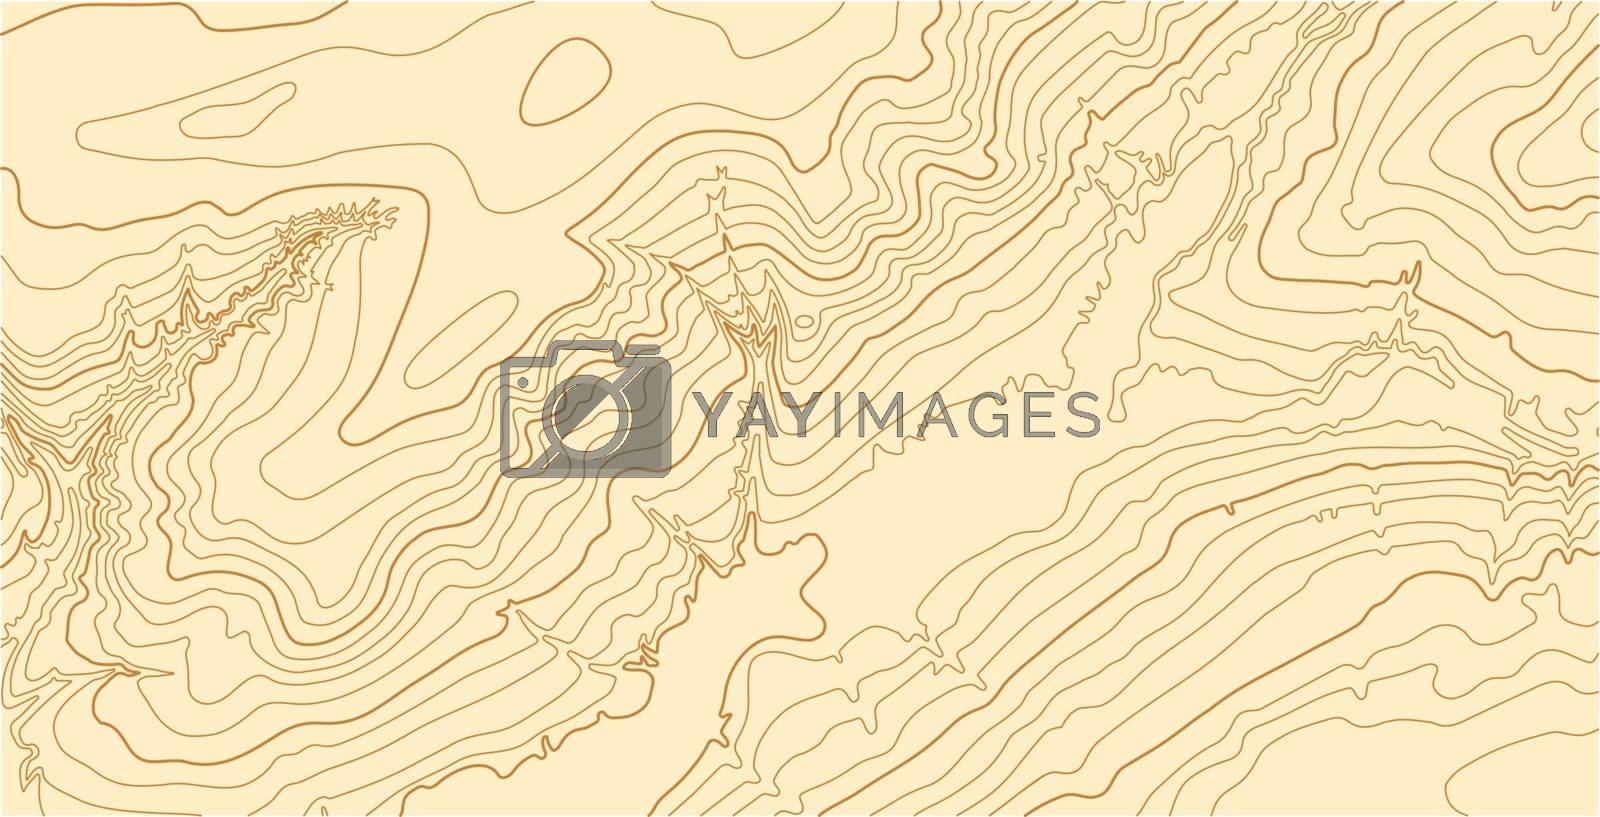 Royalty free image of Abstract vector topographic map in brown colors by igor_stramyk